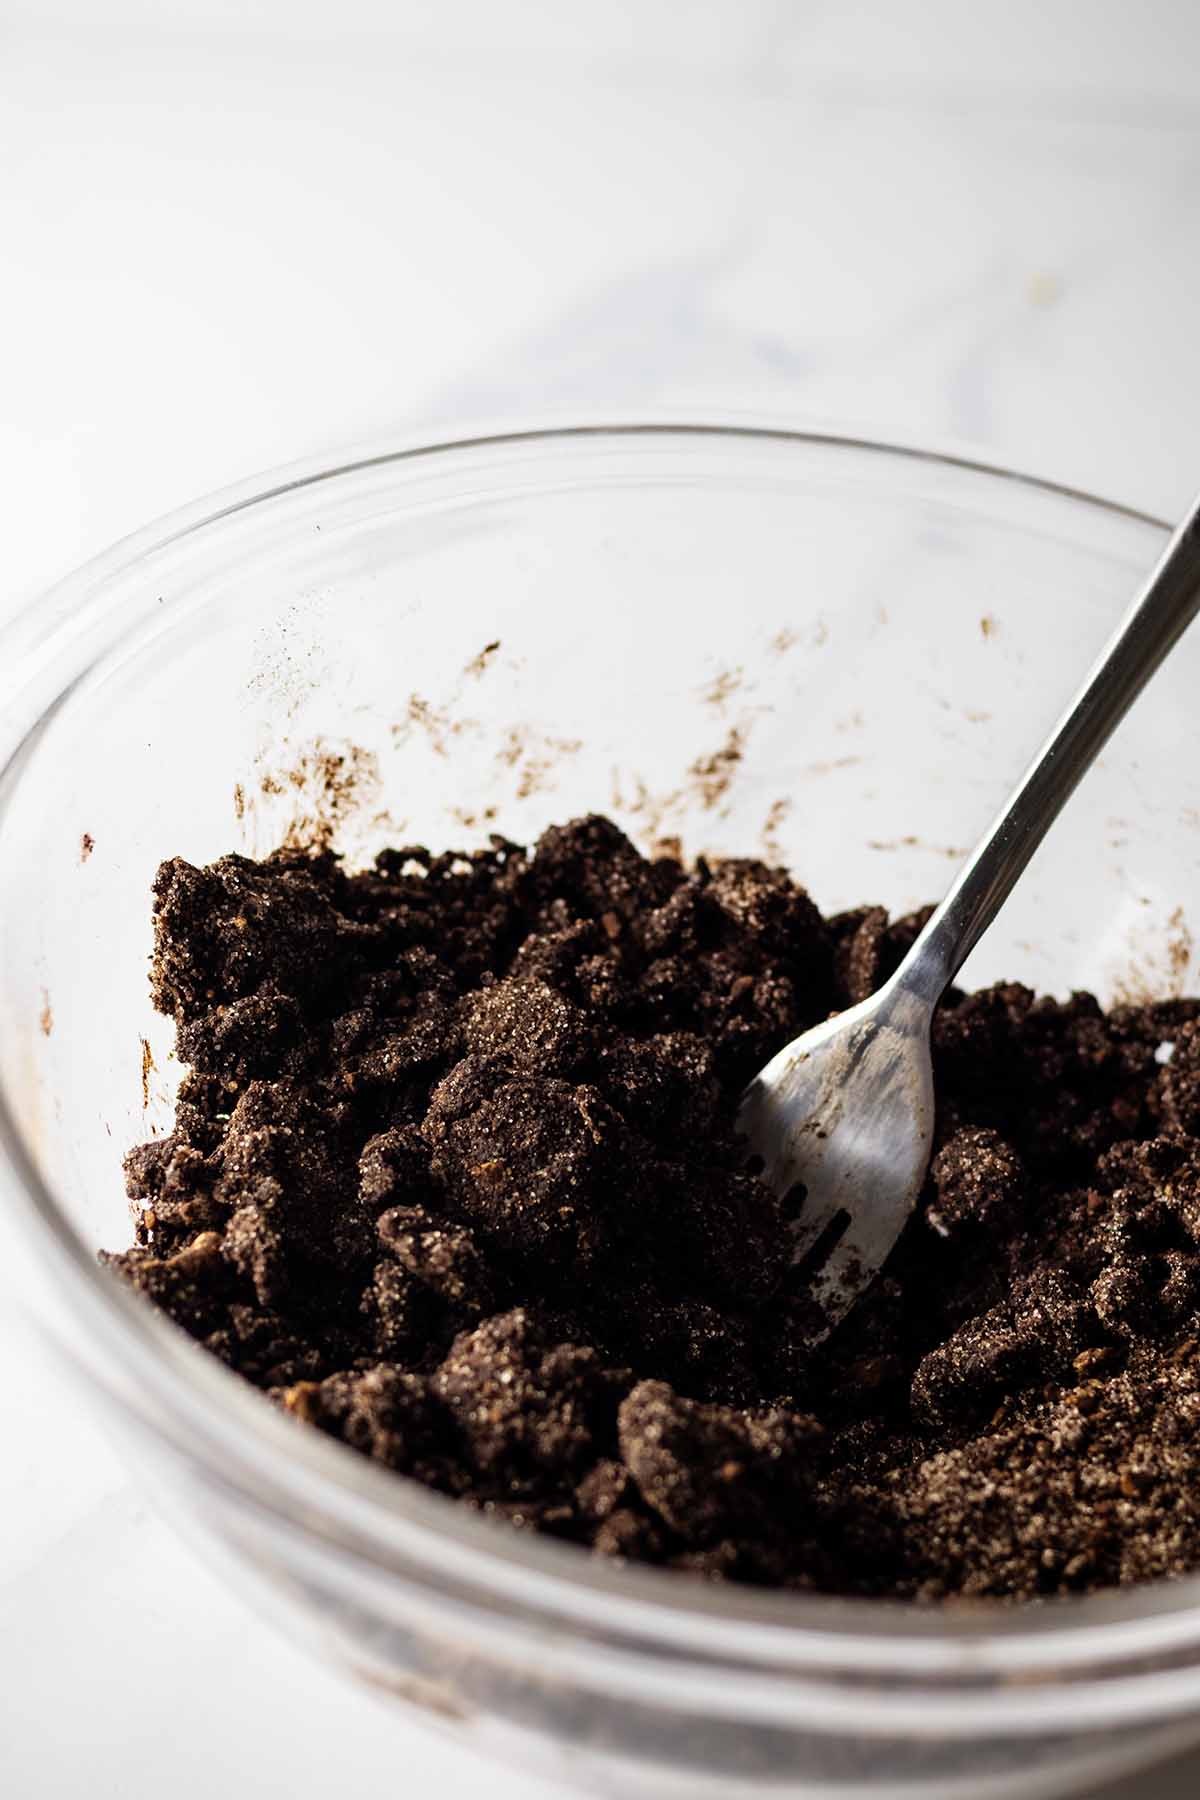 Chocolate crumb topping in a glass bowl with a fork